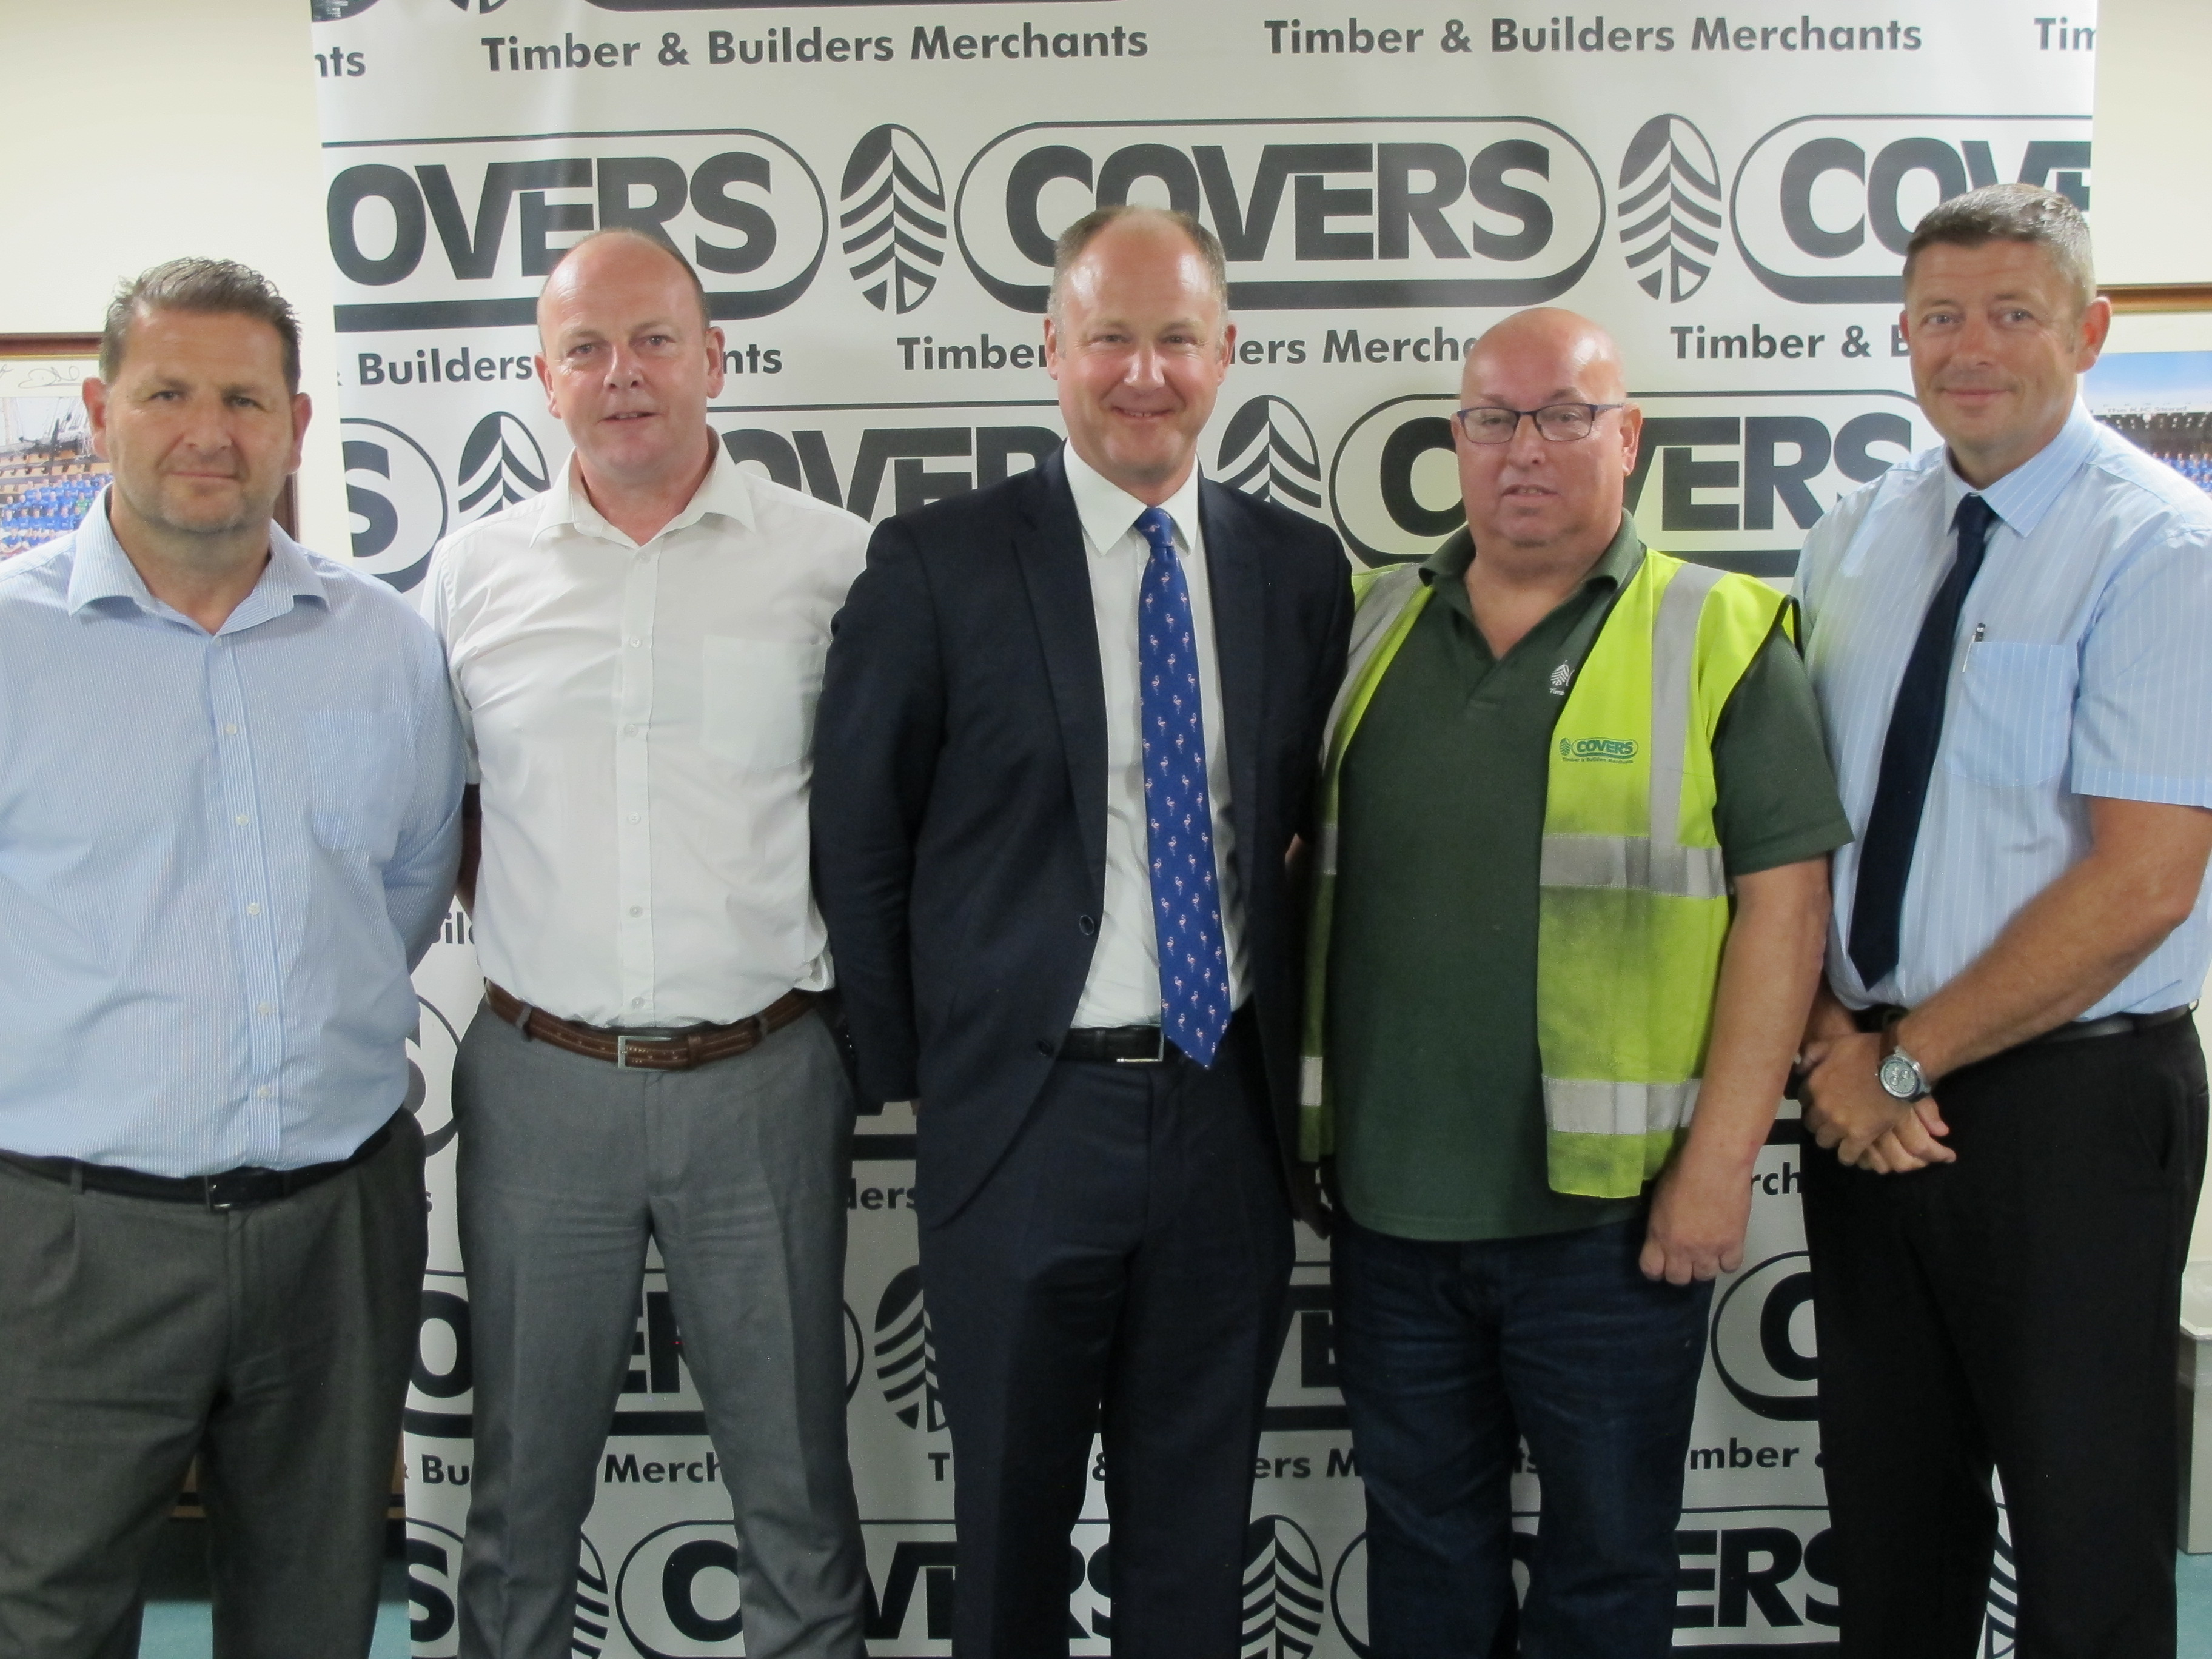 205 combined years of service for Covers employees